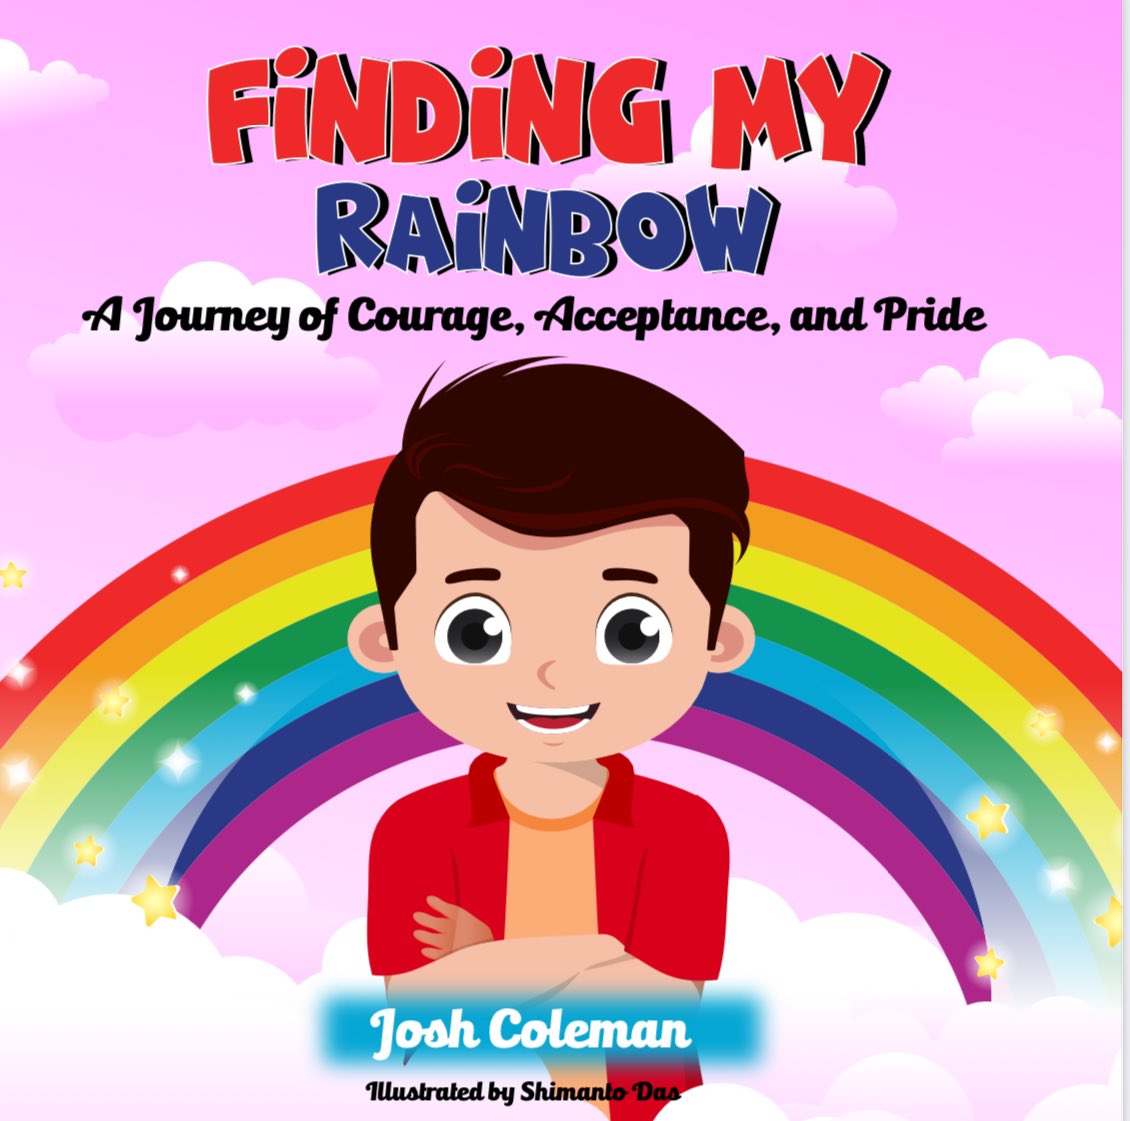 I'm so excited to share with you all the front and back covers of my book 'Finding My Rainbow: A Journey of Courage, Acceptance, and Pride'. 🌈 A heartfelt thank you to everyone who has read it and shared their thoughts. Your quotes on the back cover truly encapsulate the spirit